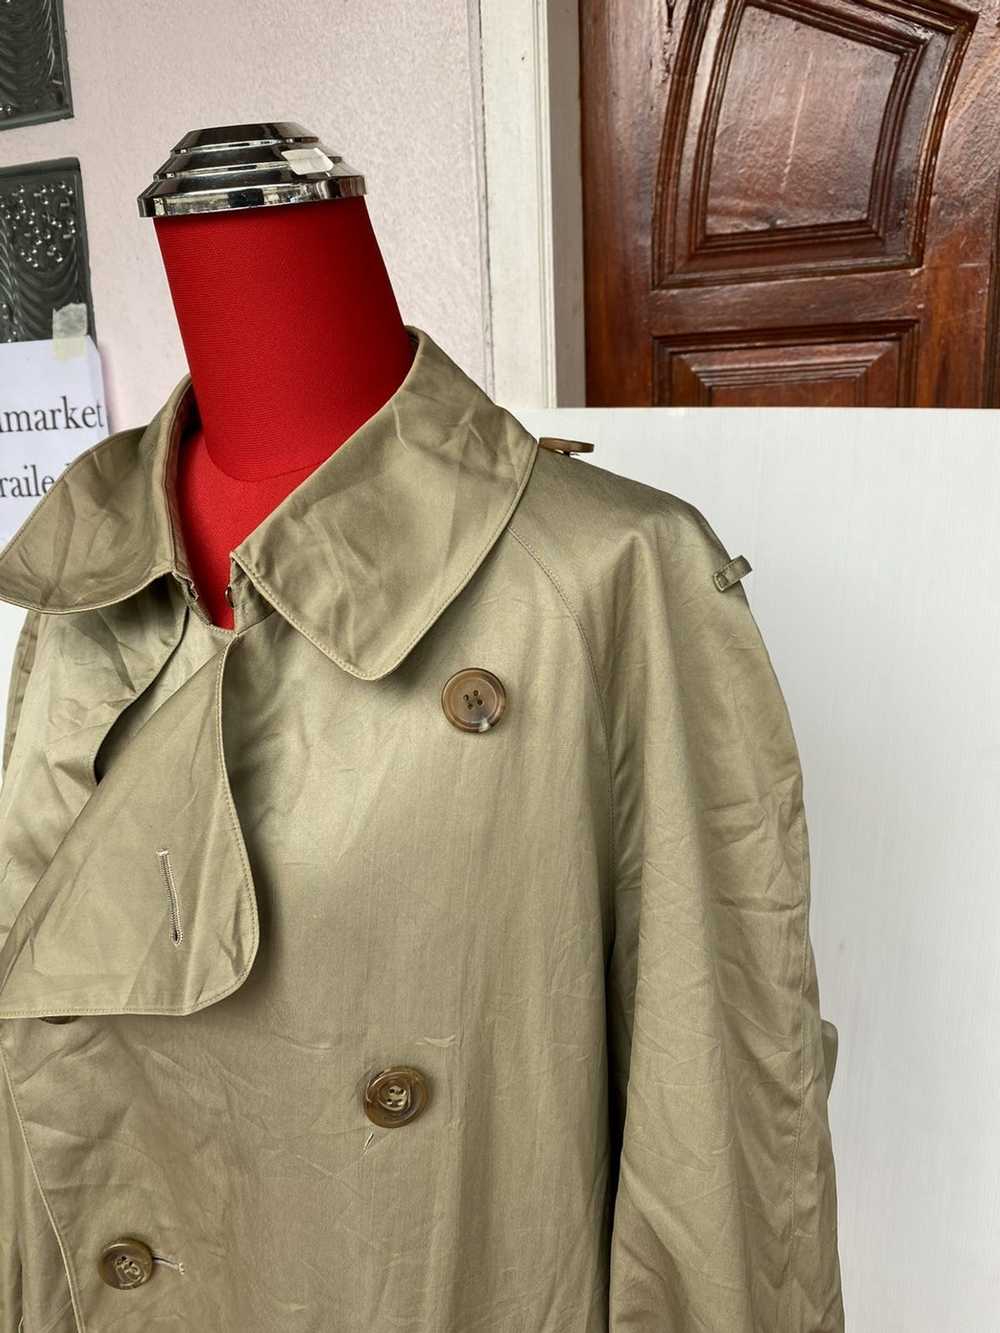 Burberry RARE VINTAGE BURBERRY TRENCH COAT - image 5